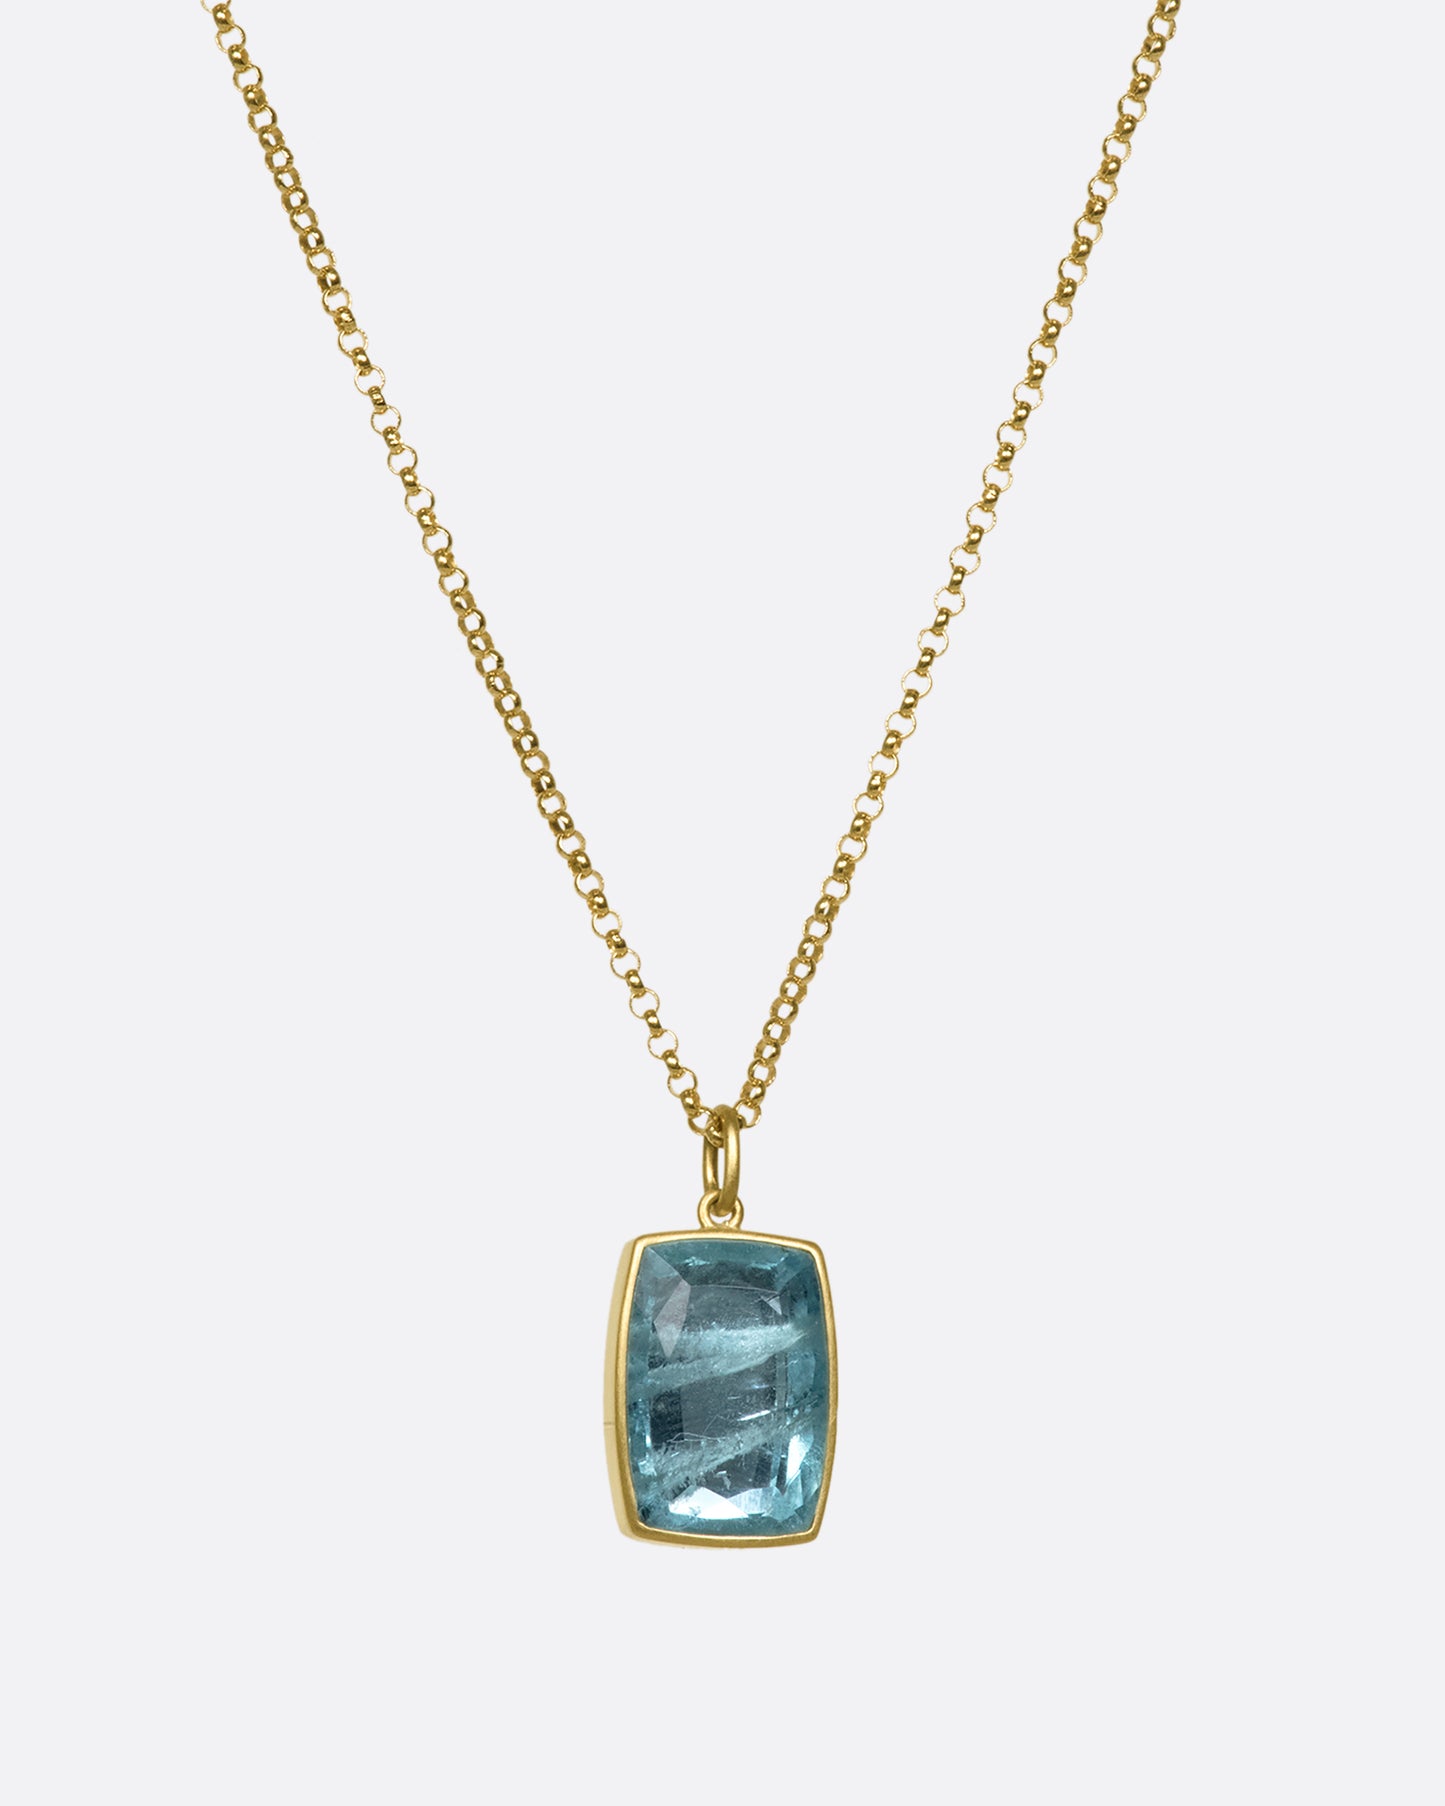 A cushion shaped aquamarine pendant with a yellow gold bezel on a gold chain.